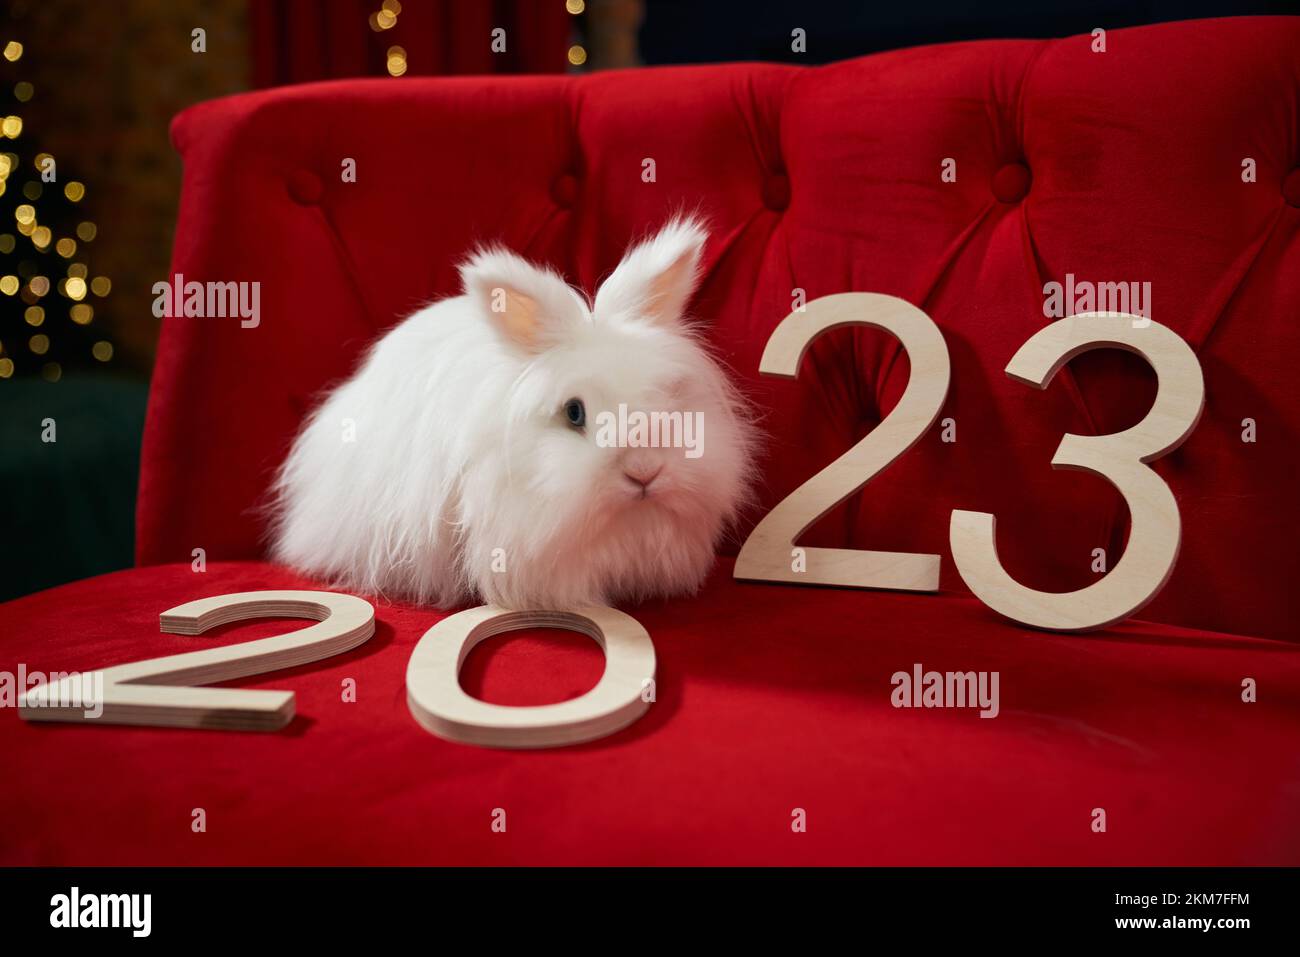 Side view of white, furry rabbit sitting on red, velvet sofa. Animal, symbol of new year 2023 looking at camera, having photoshoot indoors. Concept of Stock Photo